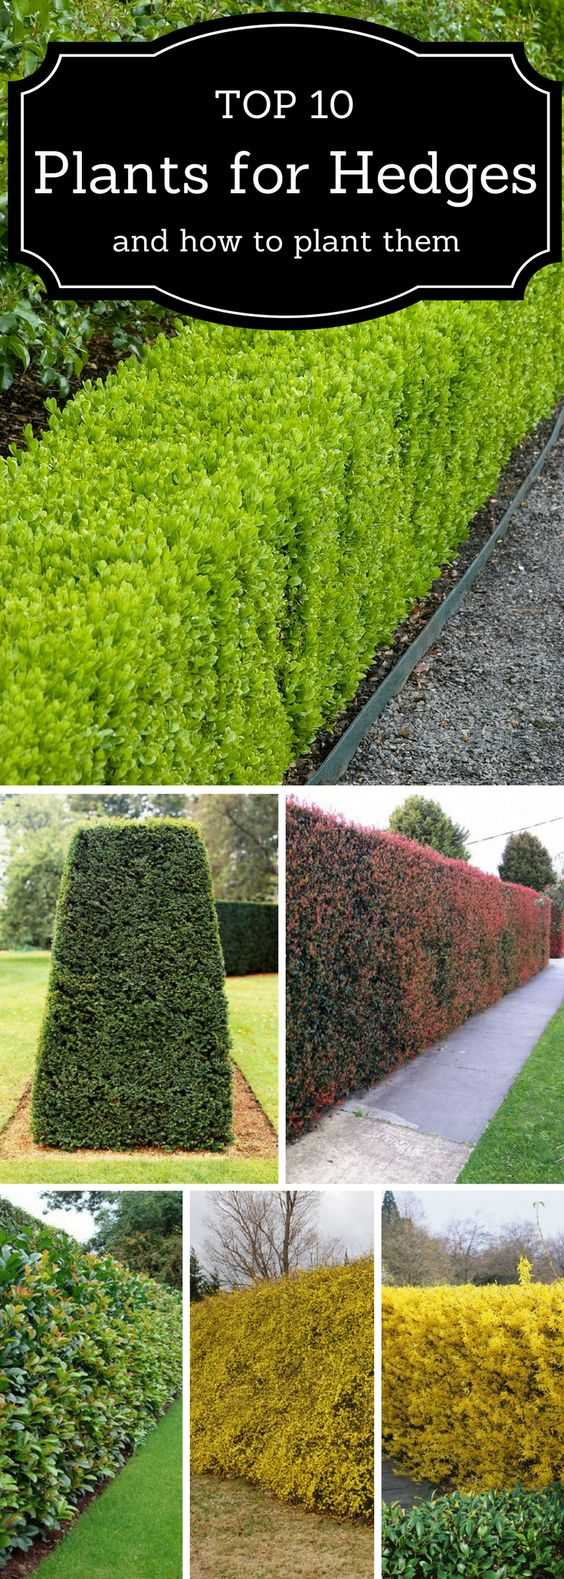 Hedges are a great way to fence a front yard, but keep it looking natural and lush with greenery. Check out these hedge ideas at Top Inspired